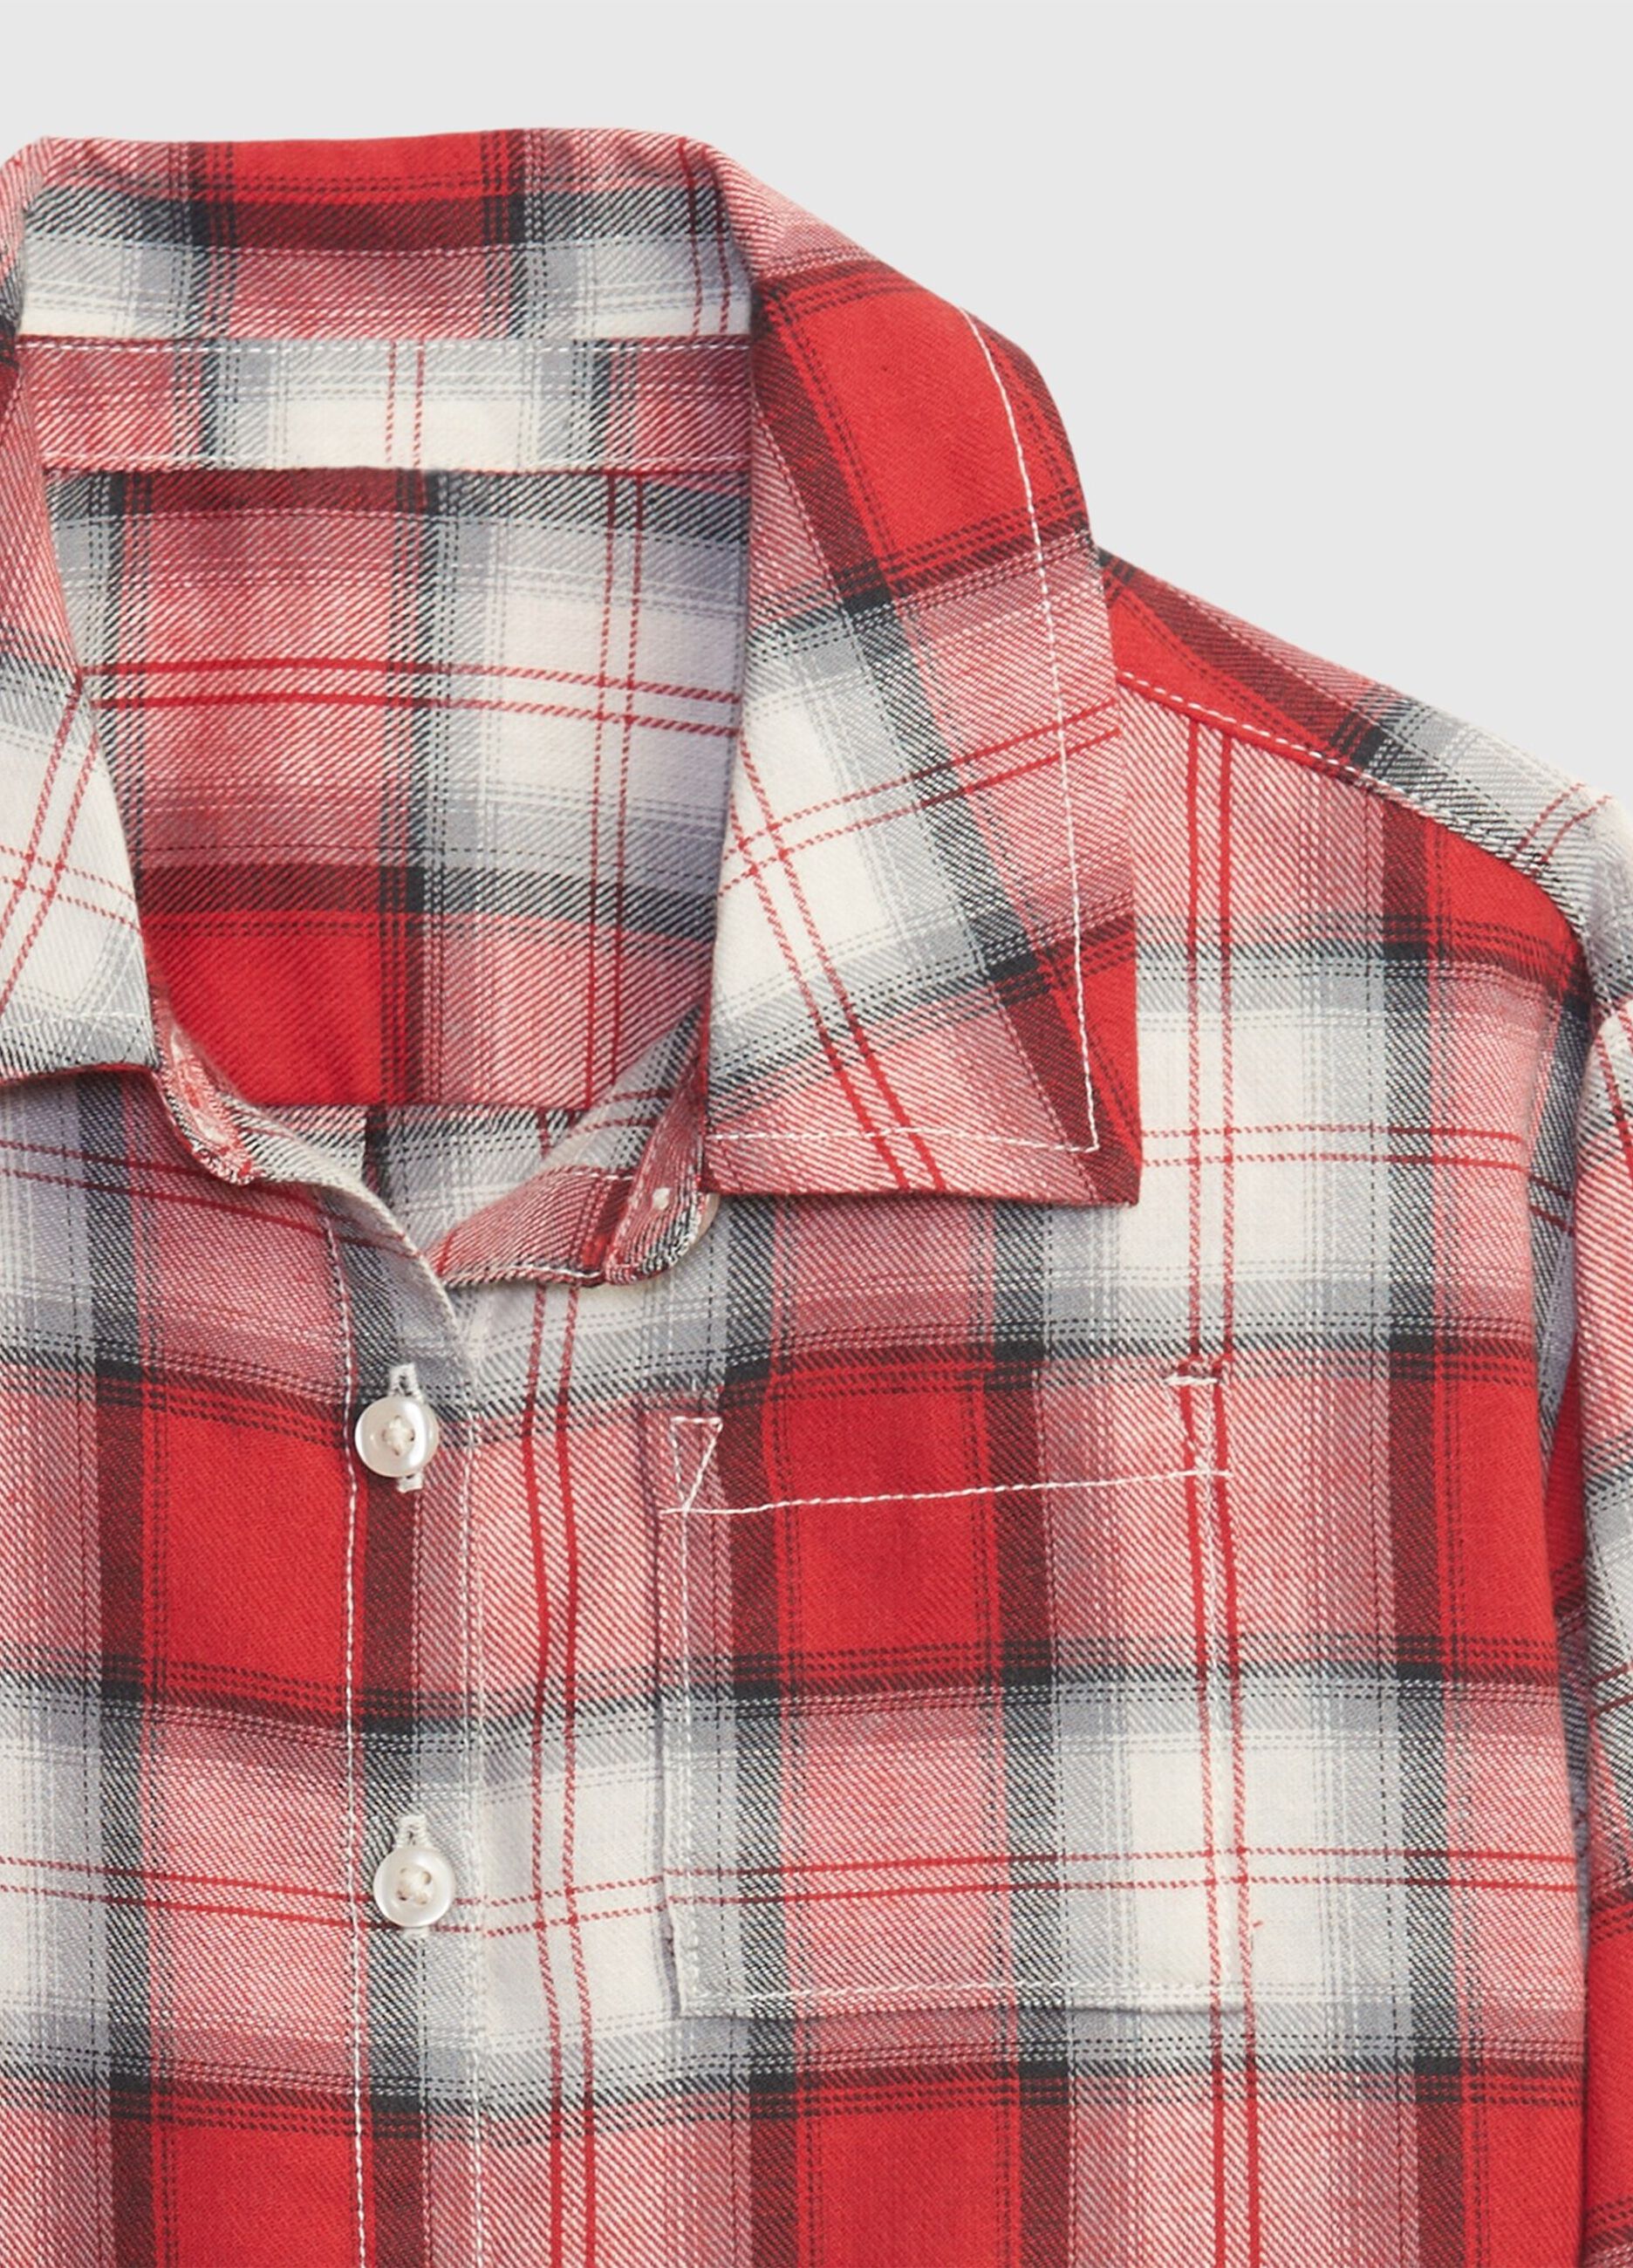 Flannel shirt in check pattern